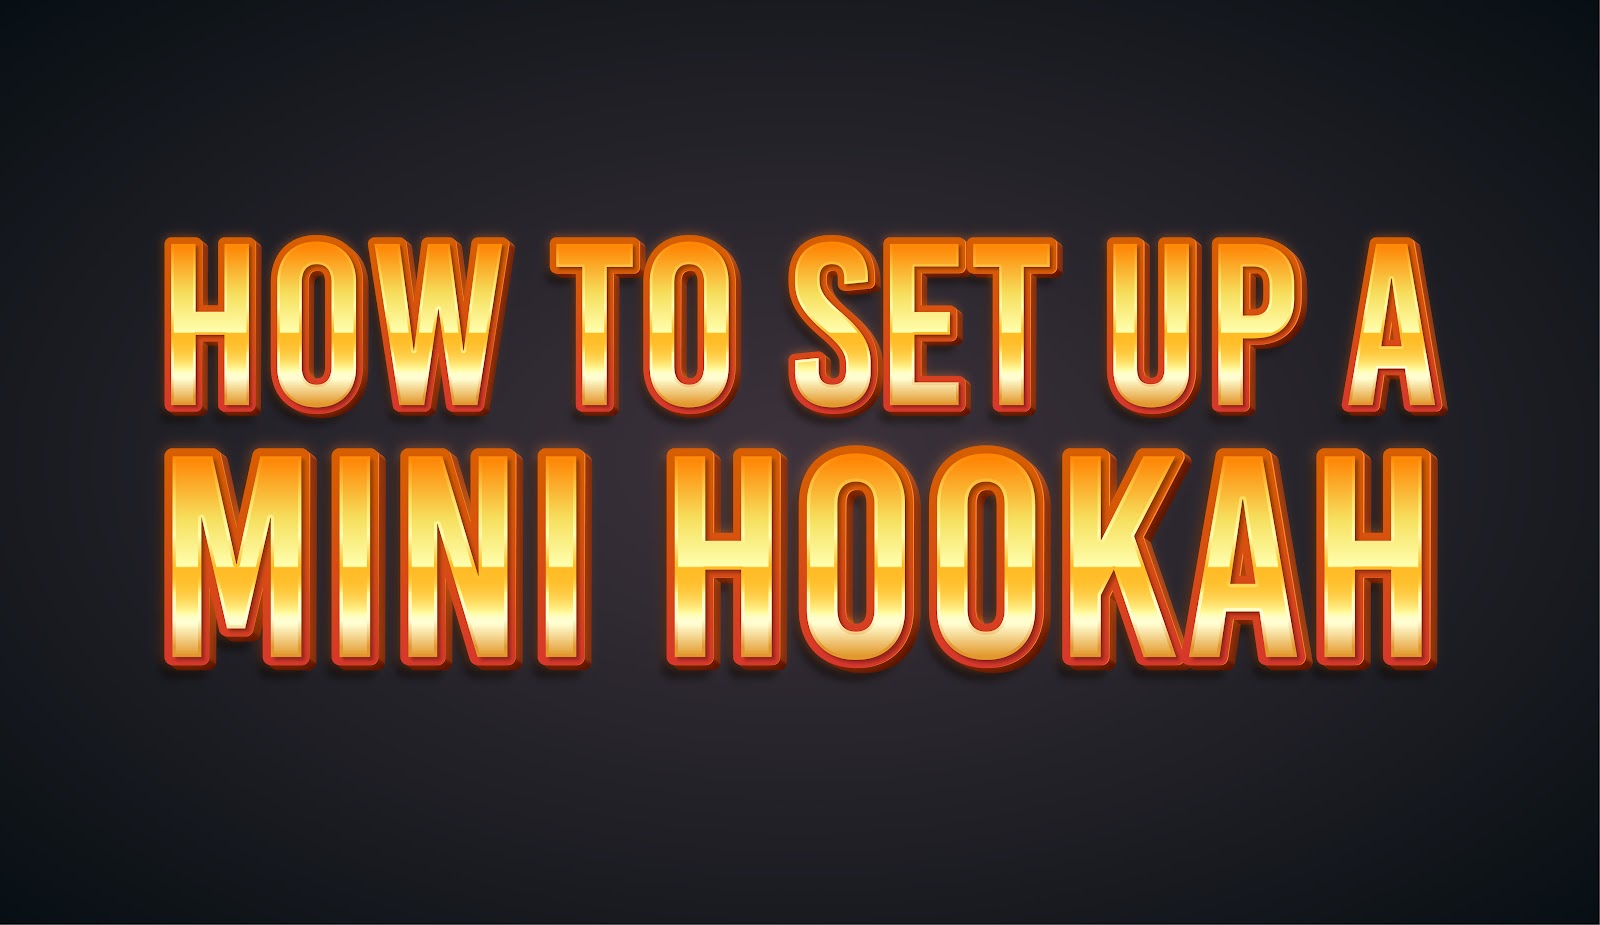 How To Set Up a Hookah